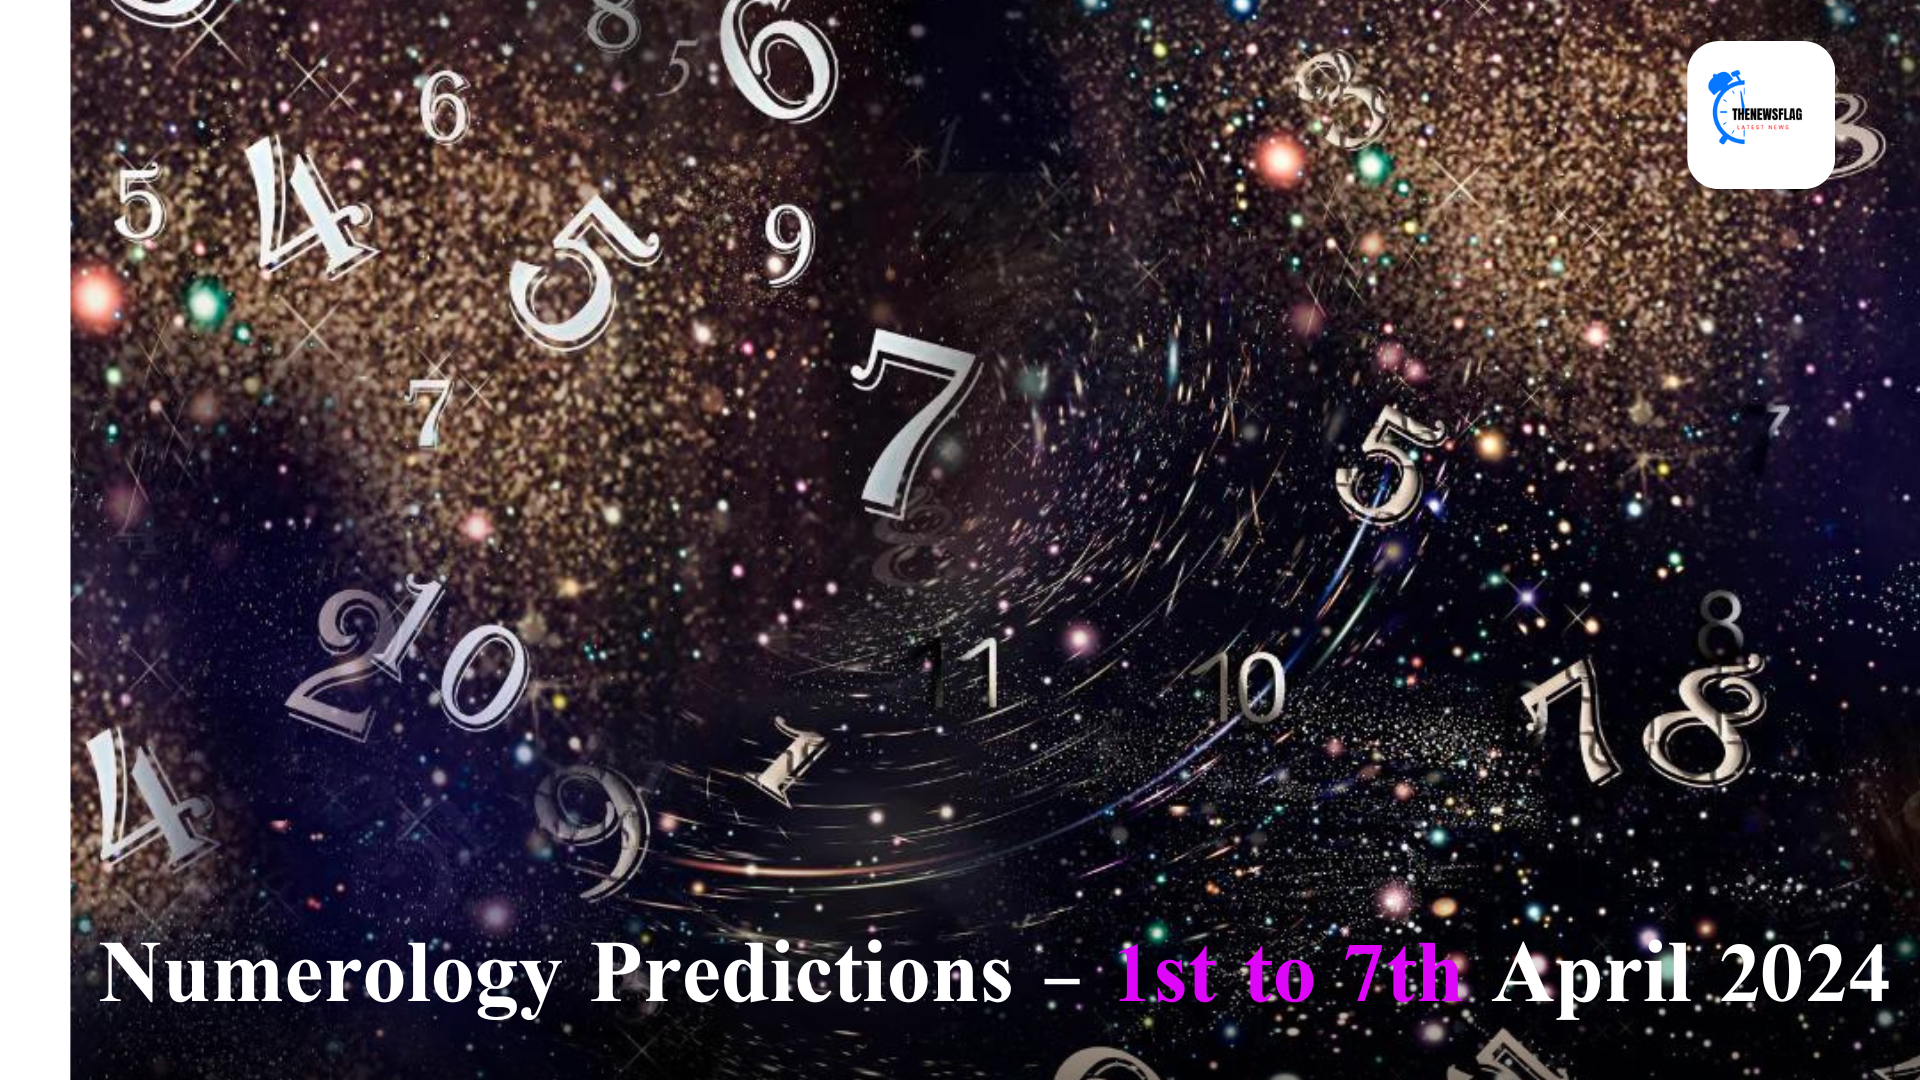 Numerology Predictions – 1st to 7th April 2024